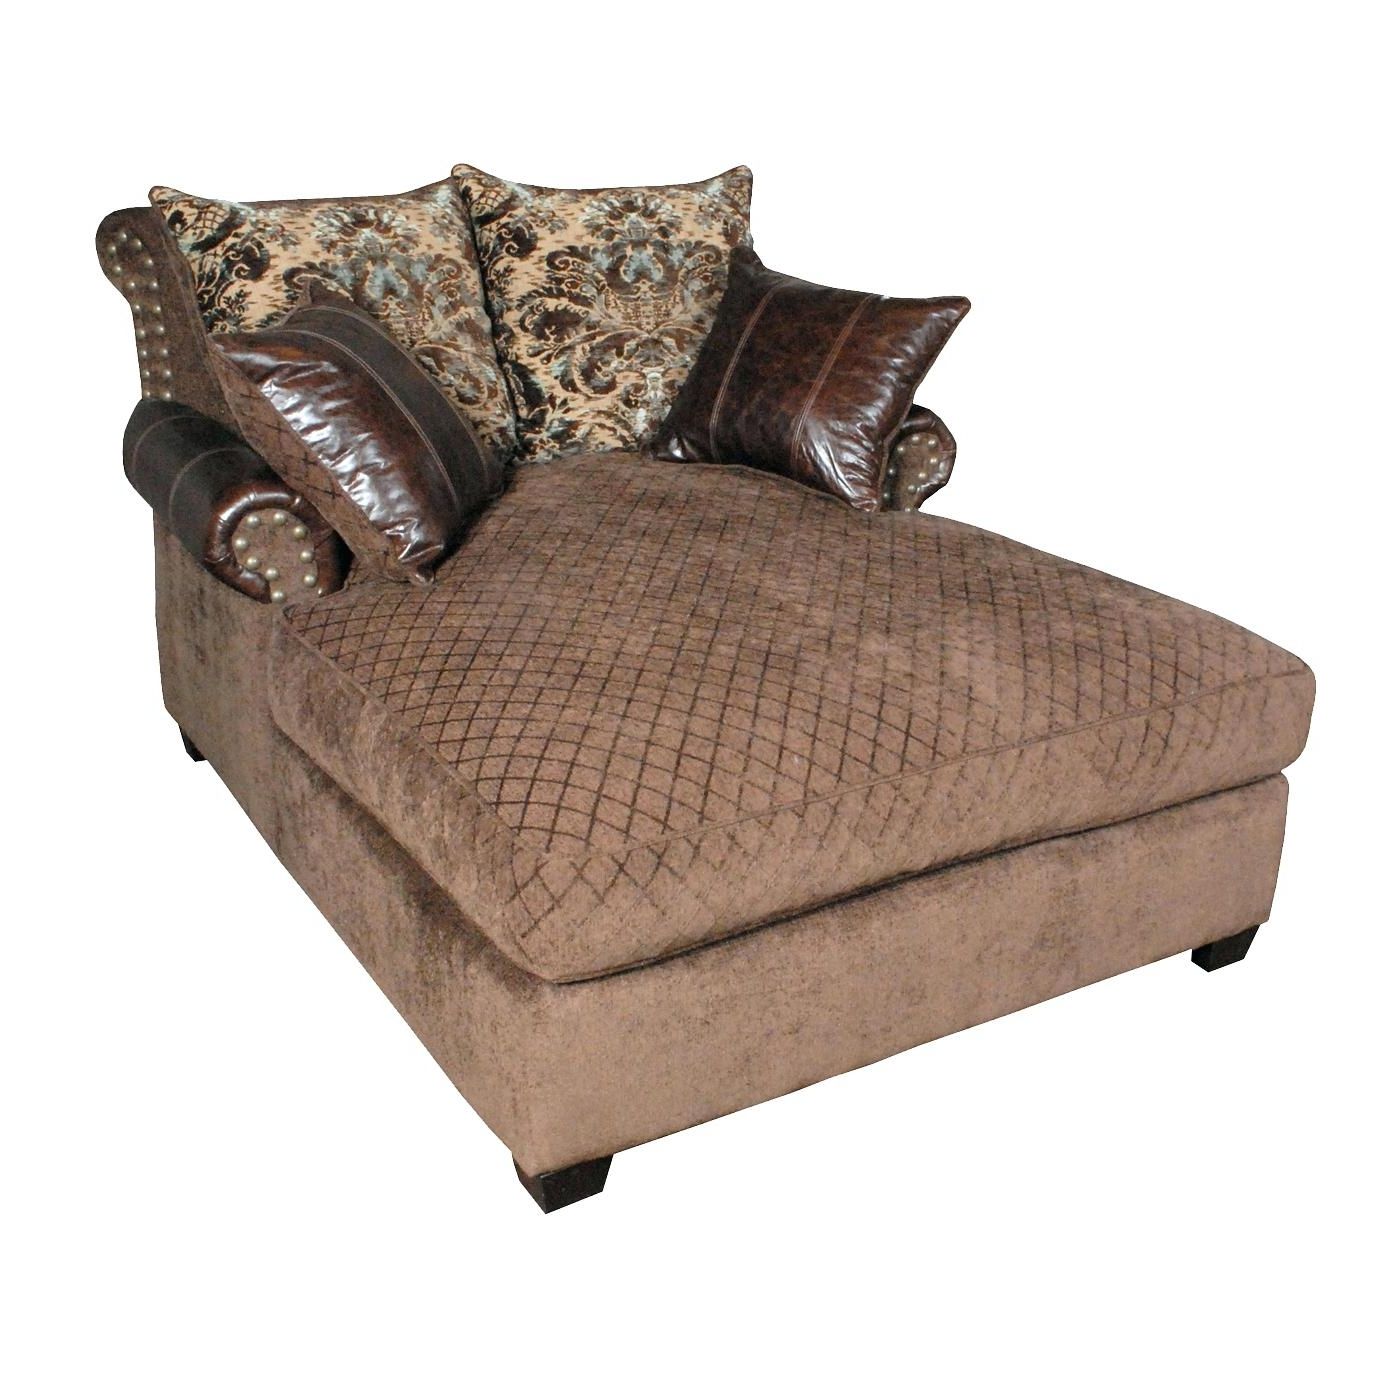 Double Chaise Lounges With Regard To Latest Double Chaise Lounge Chair Cover • Chair Covers Ideas (View 13 of 15)